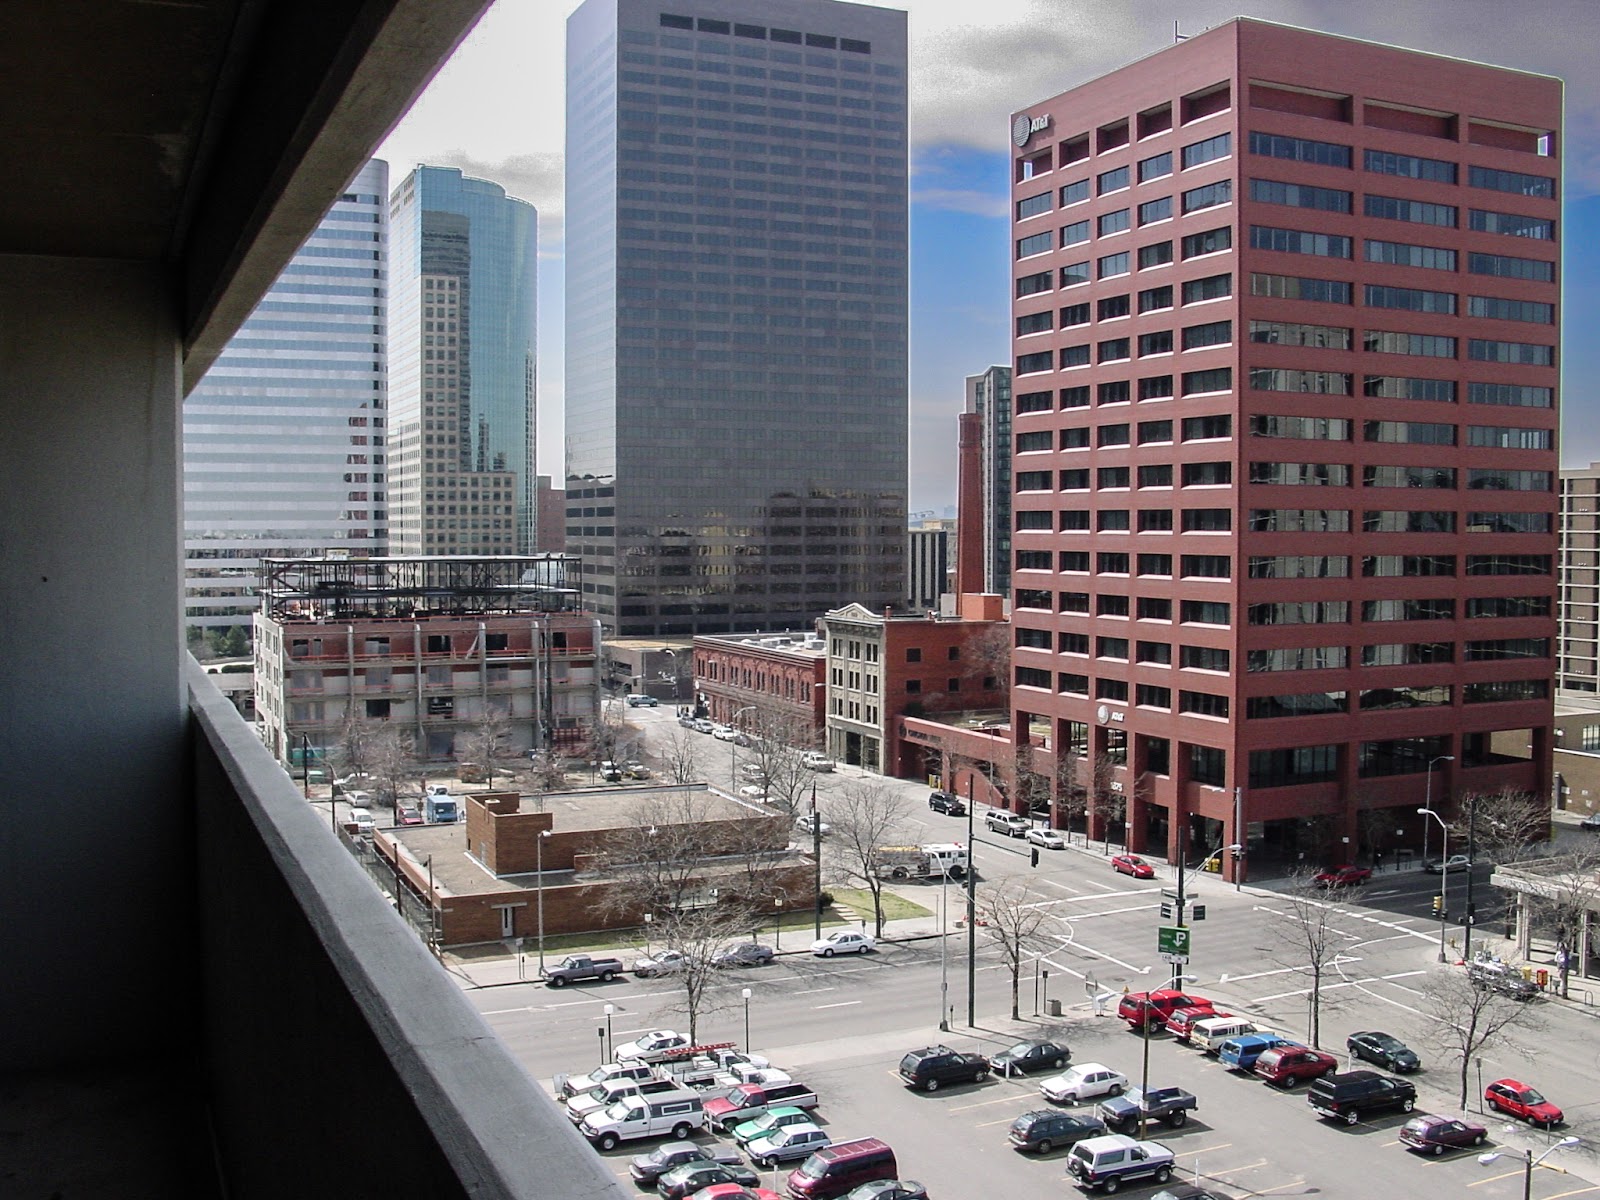 View of downtown with tall buildings and a parking lot.